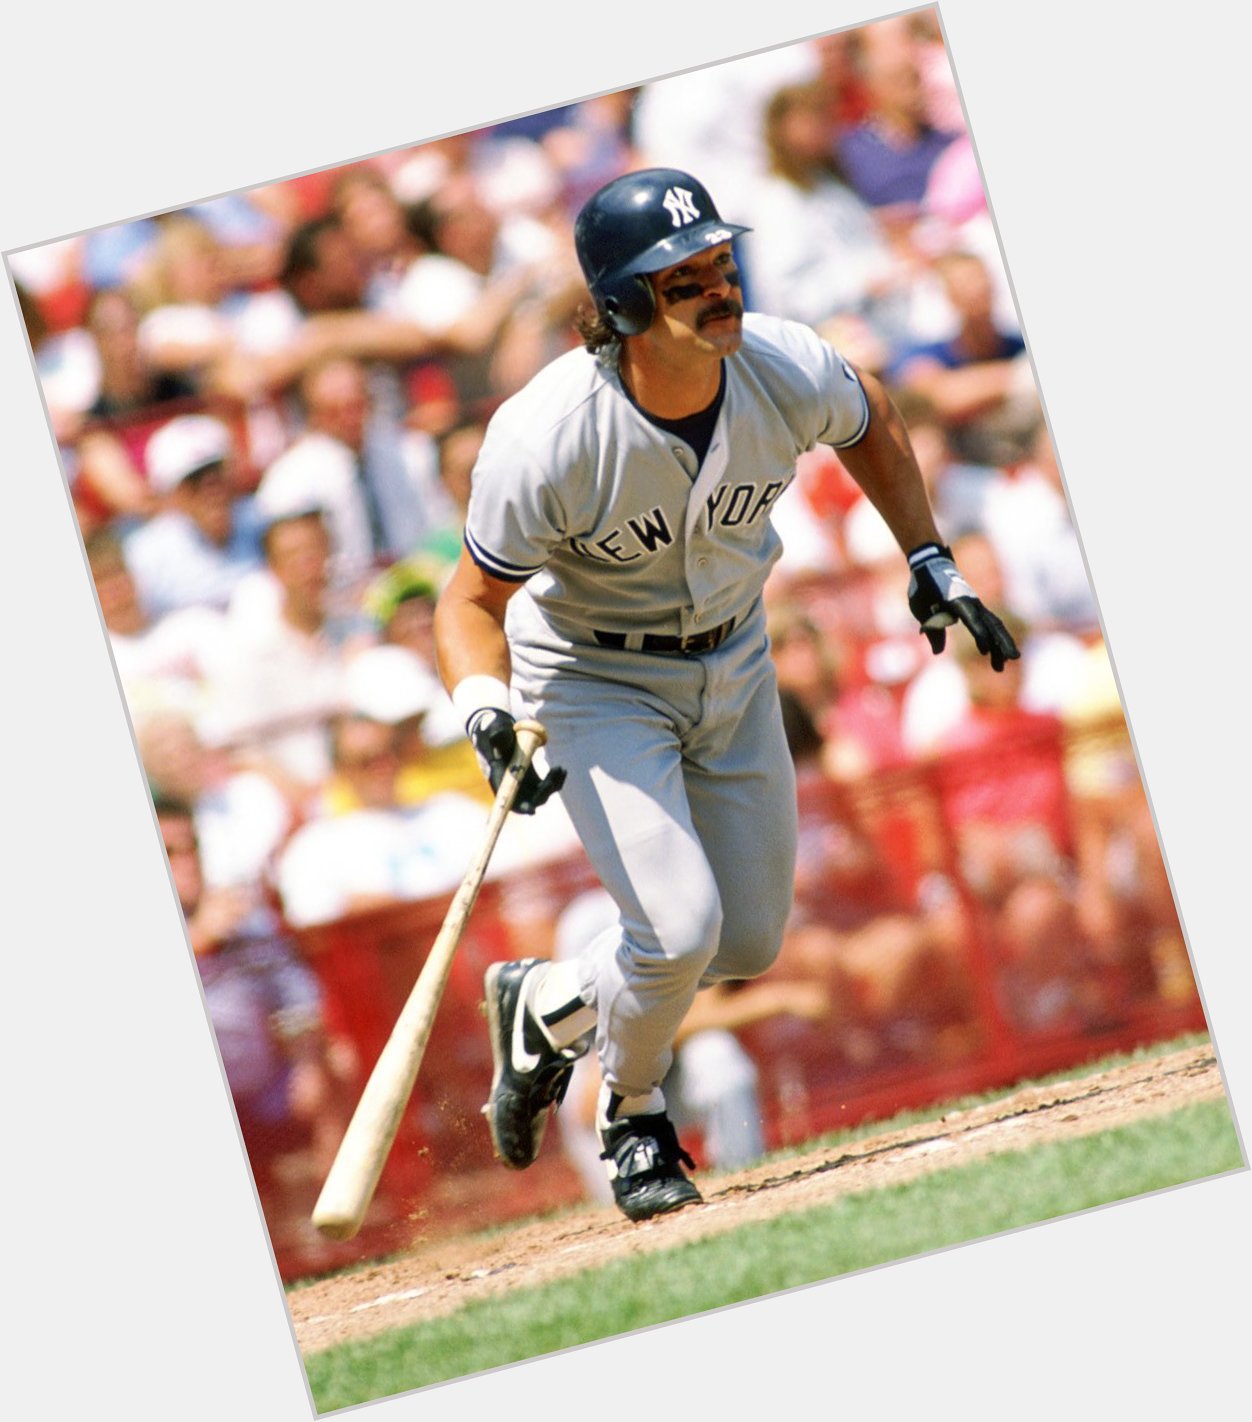 Happy Birthday to one of my favorite baseball players. The Hitman, Yankees captain, Don Mattingly 